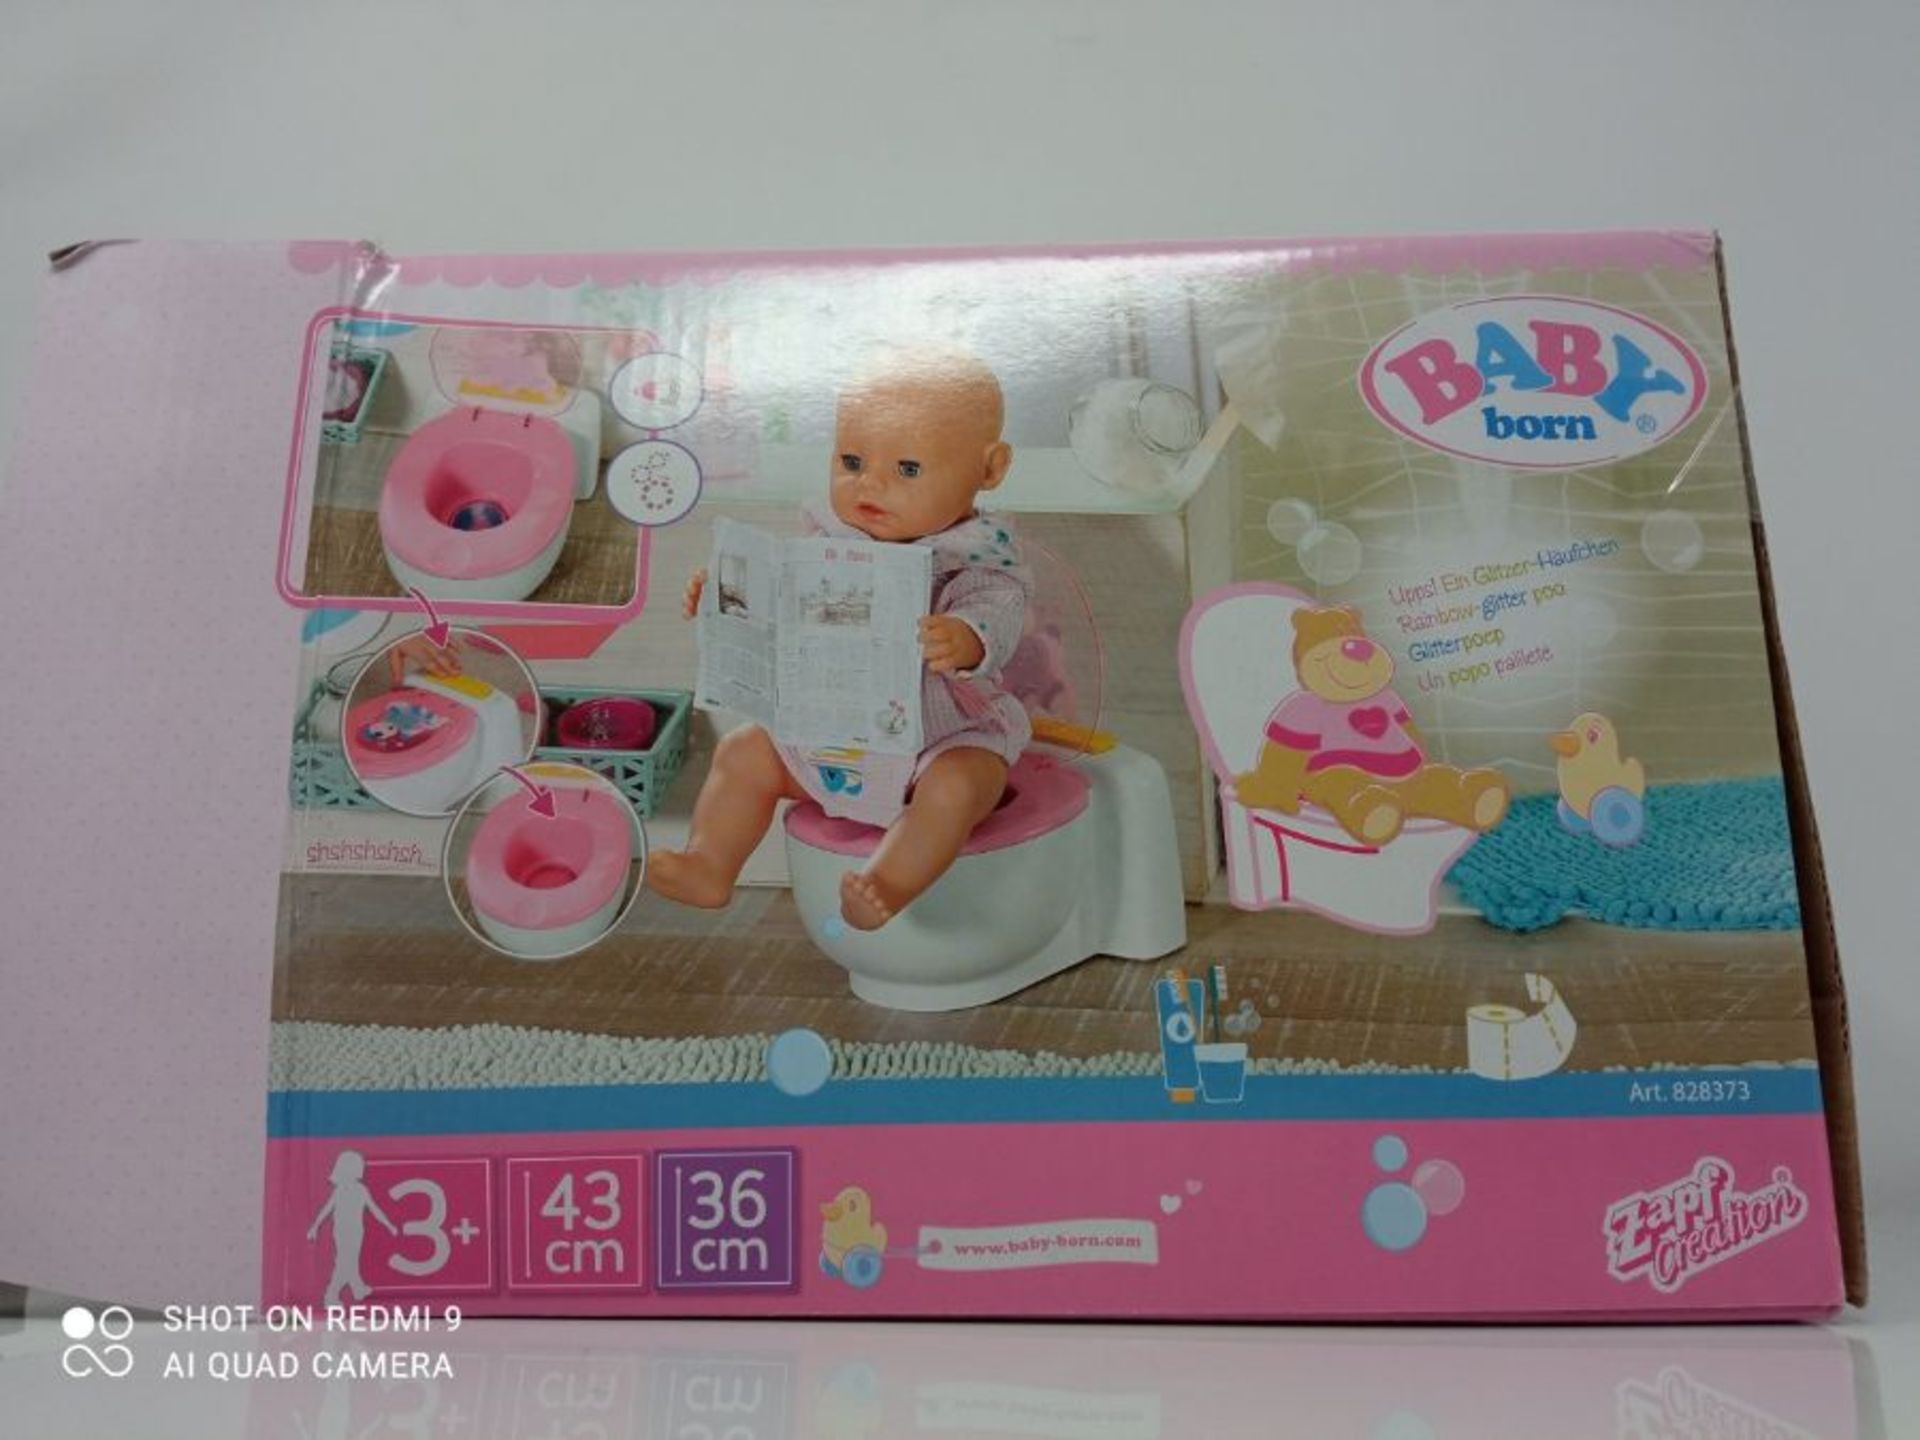 BABY born Bath Poo-Poo Toilet - Real Sound Effects - For Small Hands - Rainbow Glitter - Image 2 of 3